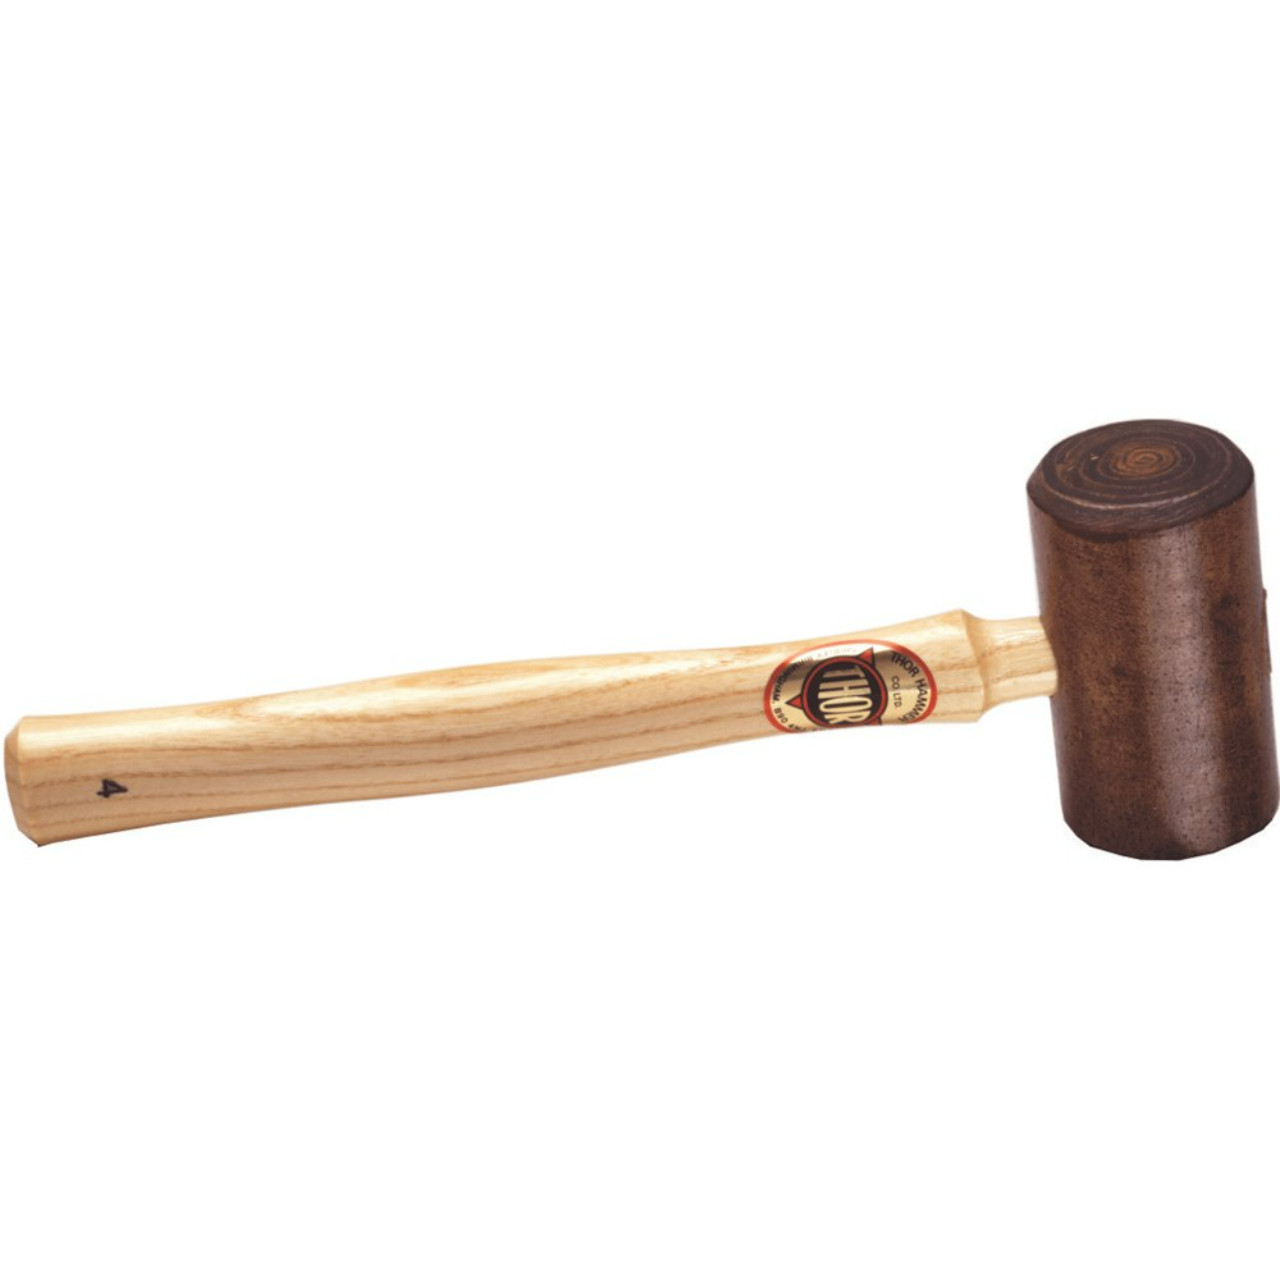 Thor 44mm Size 3 250g Rawhide Hammer with Wooden Handle